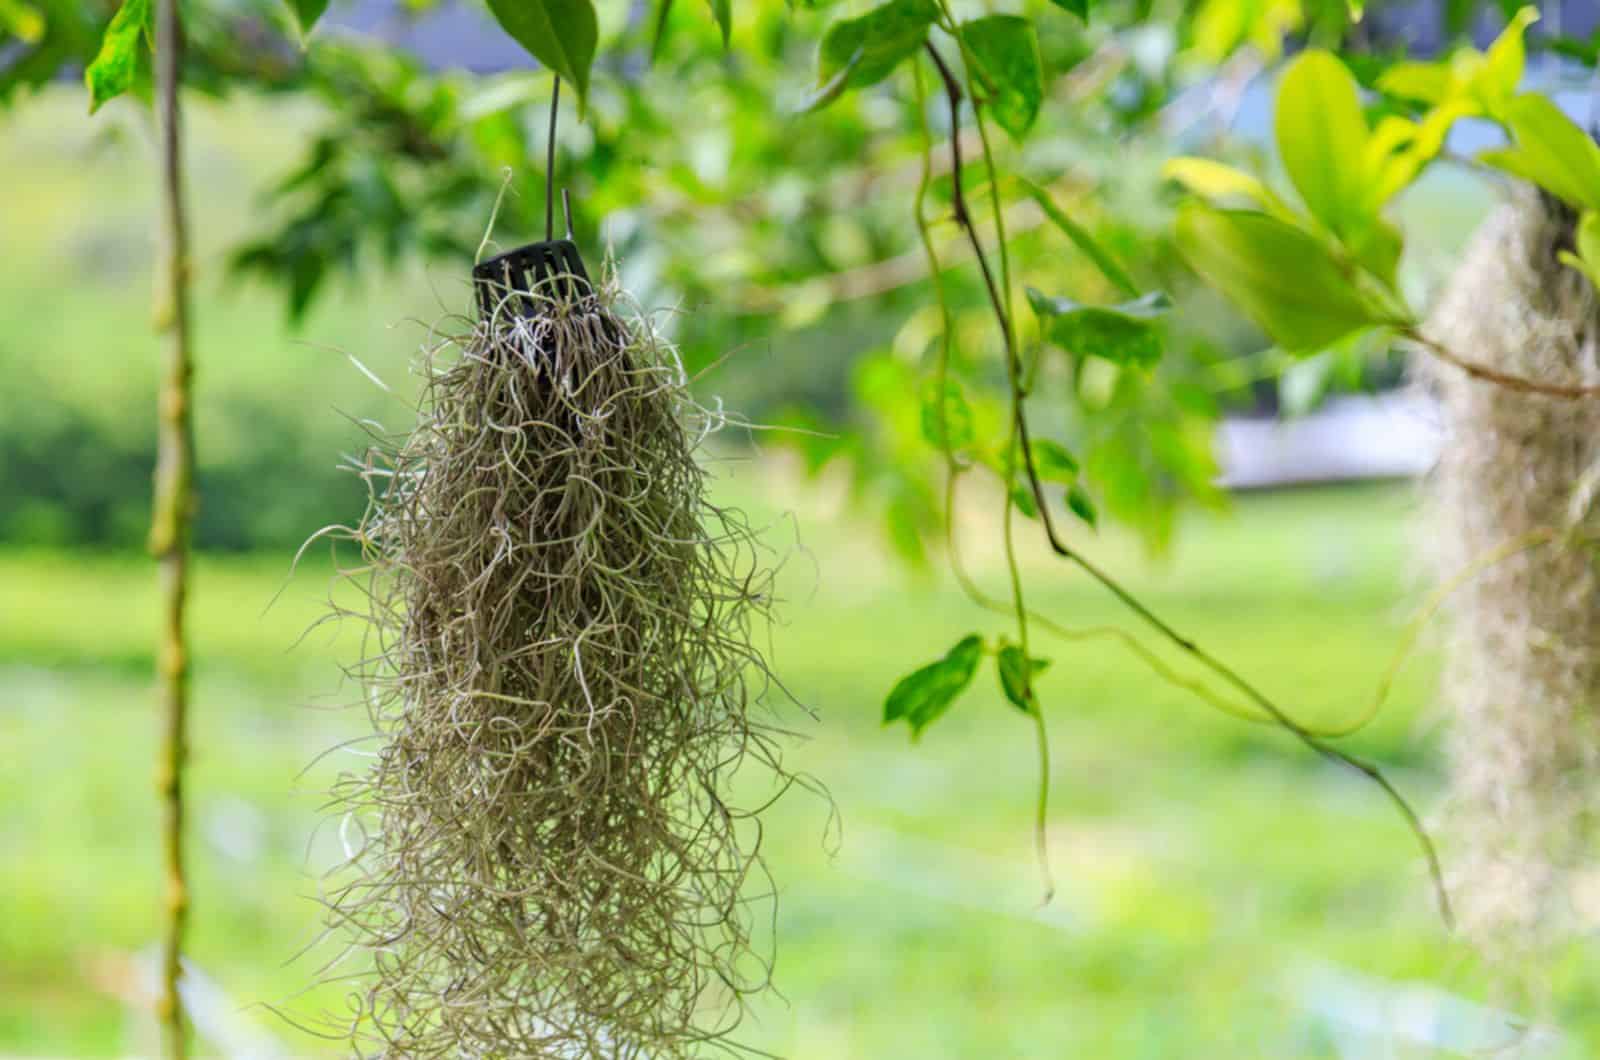 spanish moss or tillandsia usneoides with many roots hanging in the garden